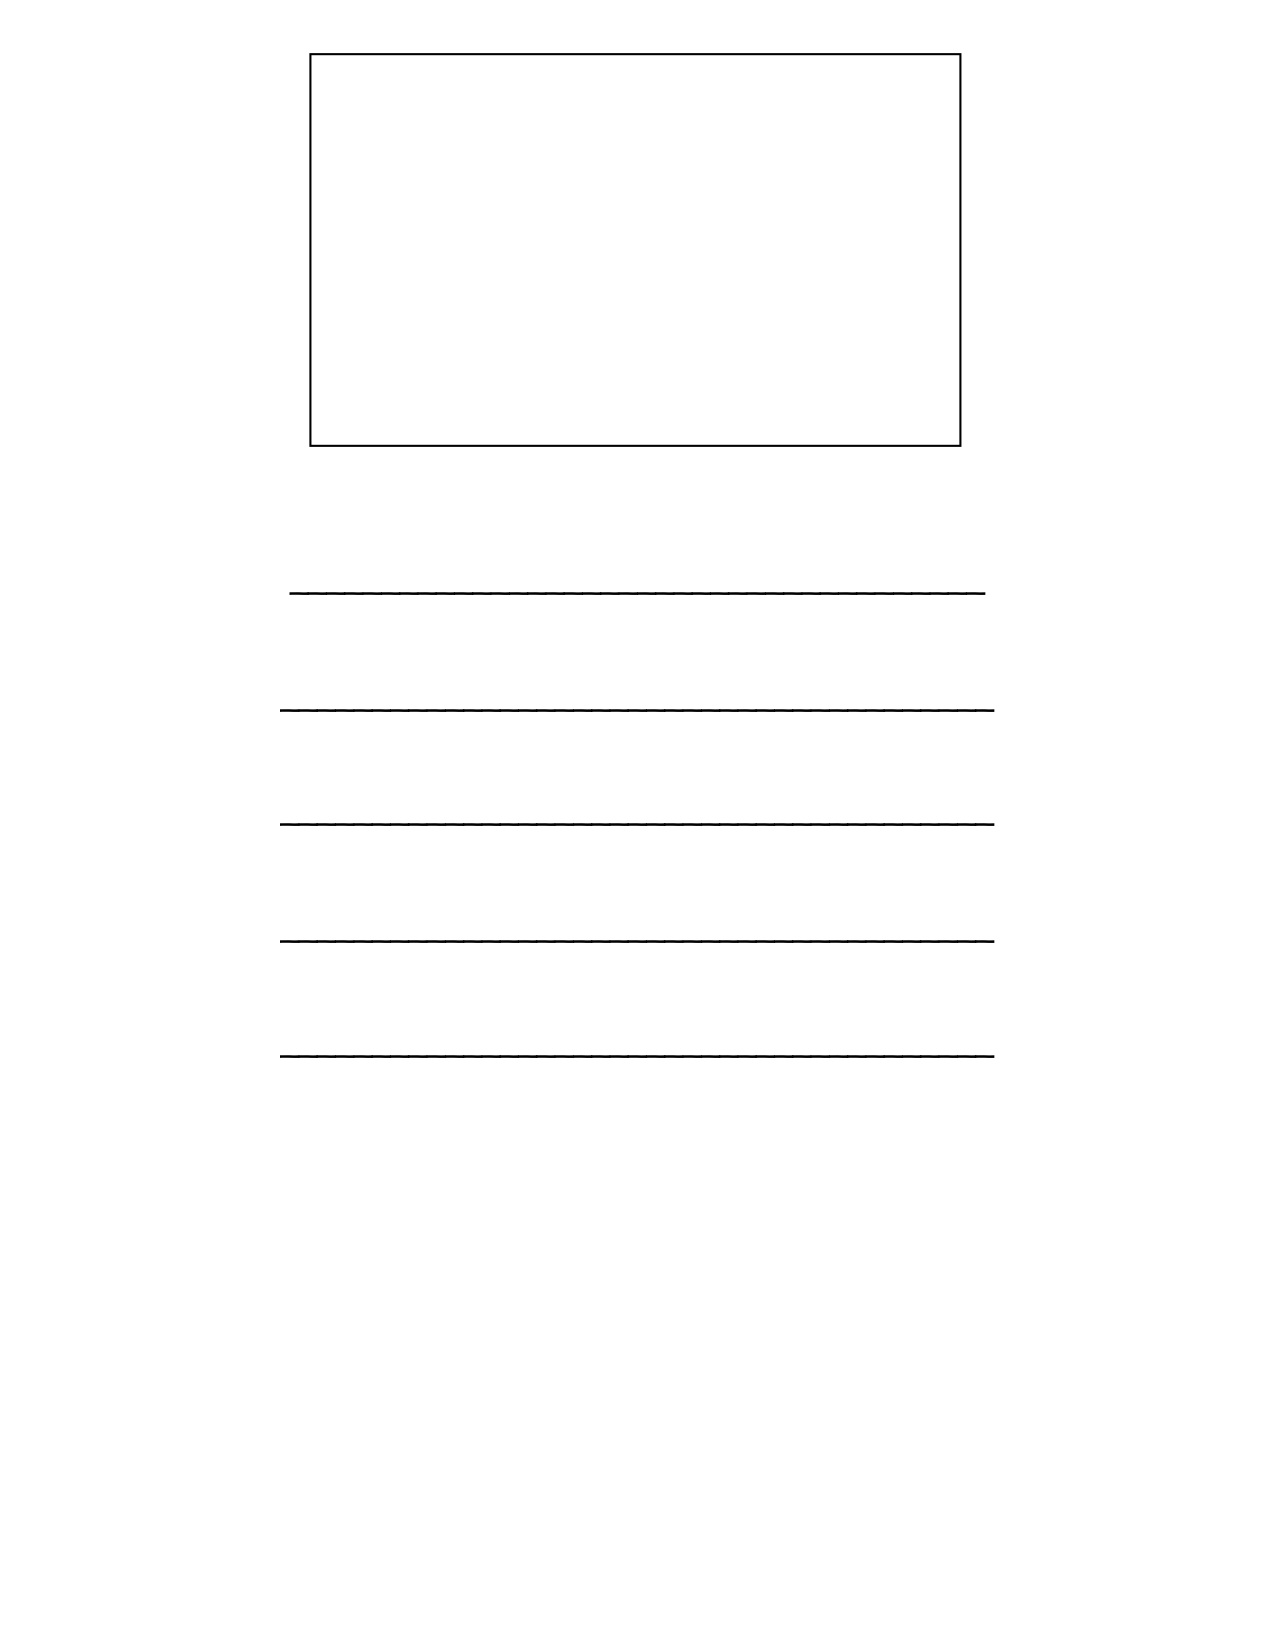 Printable pages of lined paper with drawing box - cncauto clinic